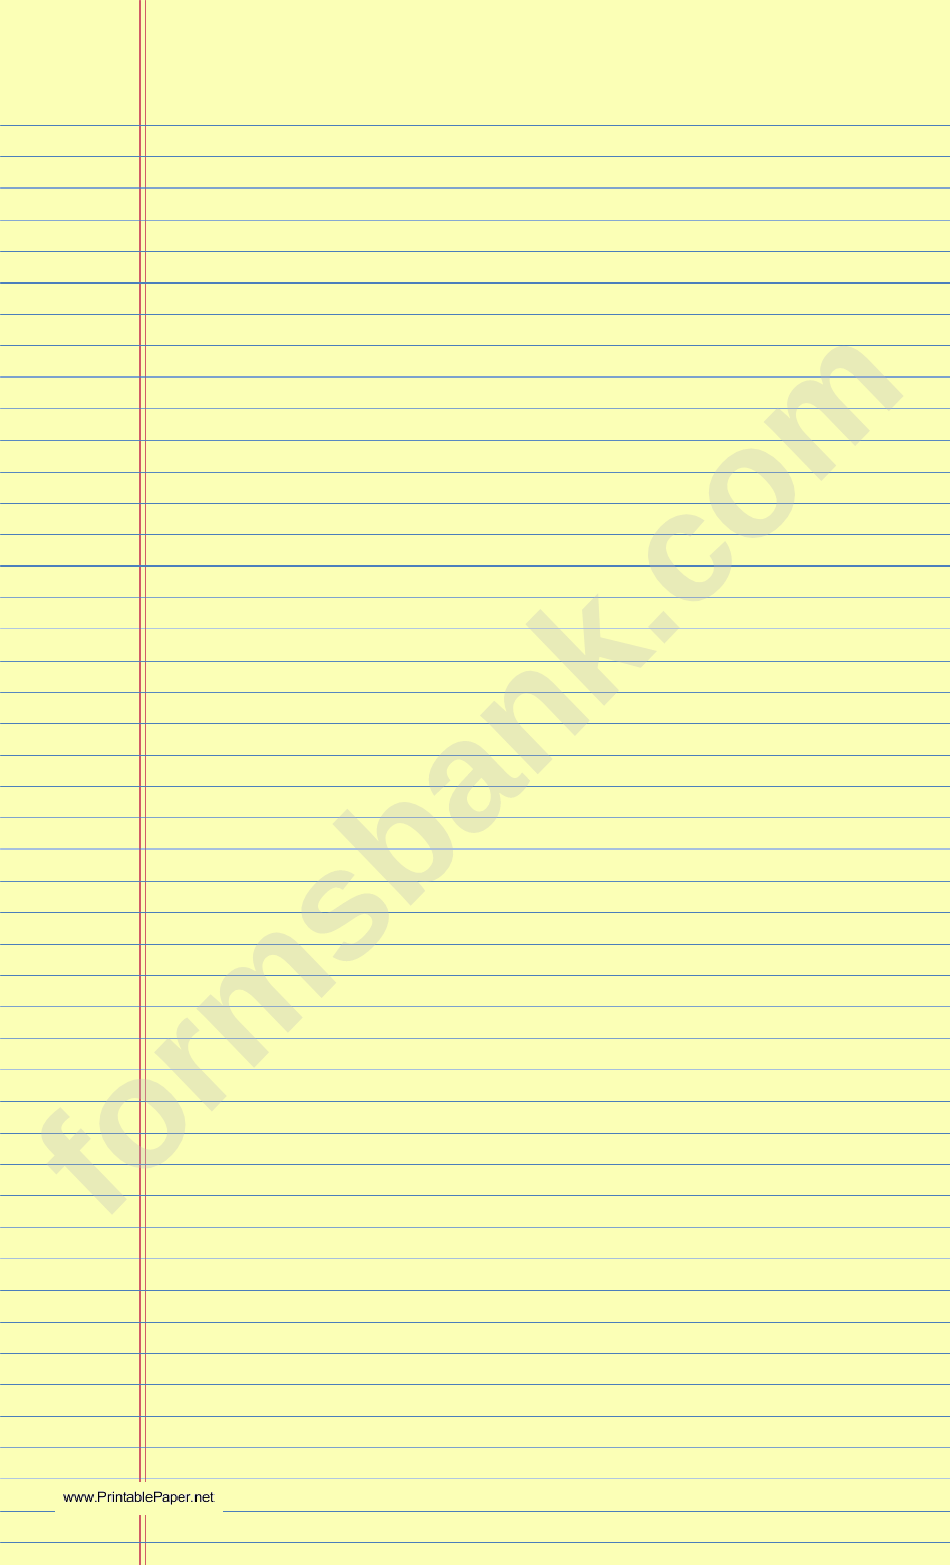 Lined Paper With Borders